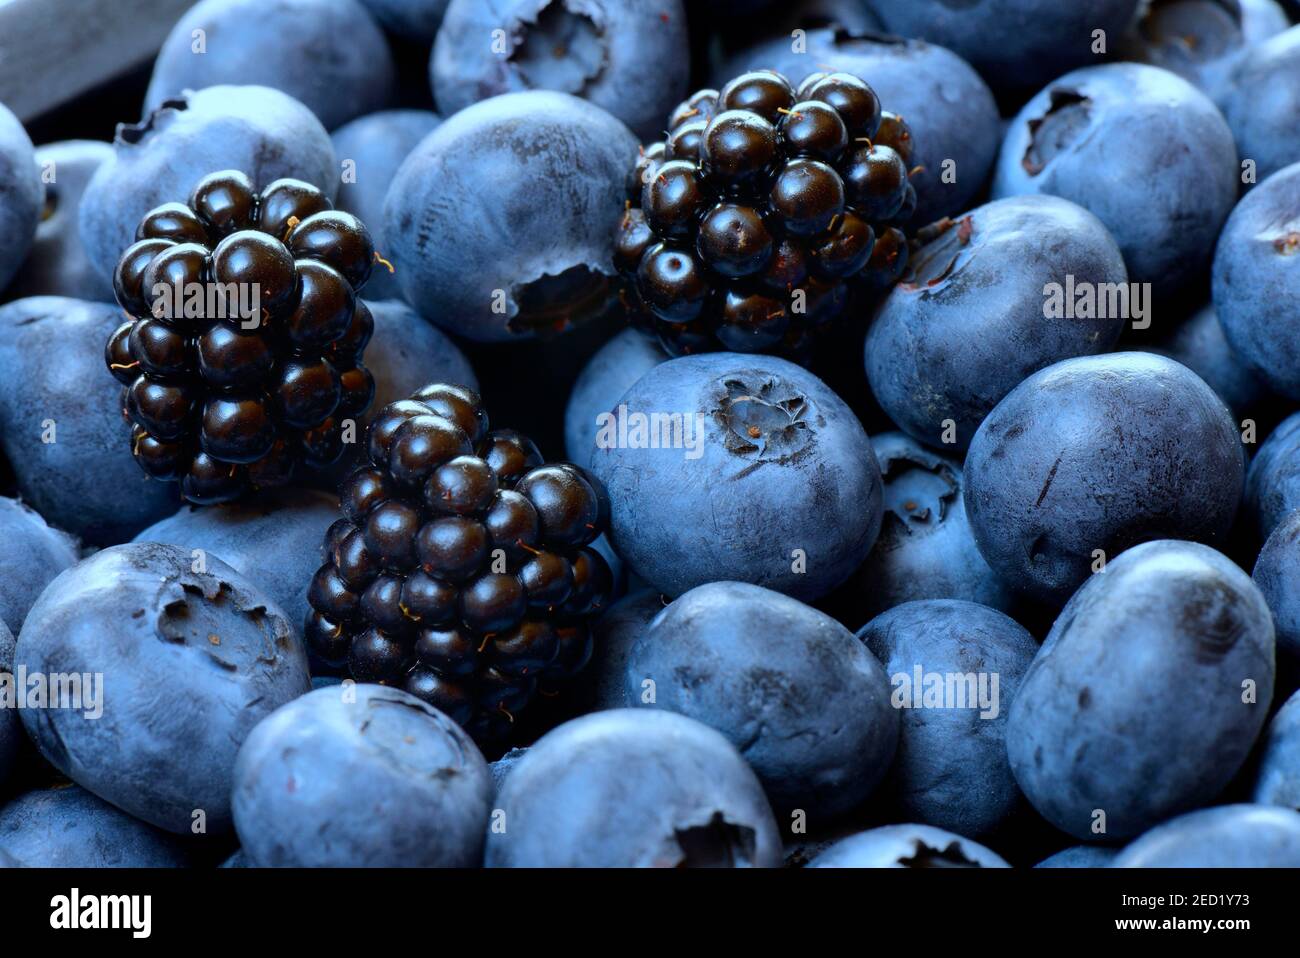 Blackberries and blueberries, cultivated blueberries Stock Photo